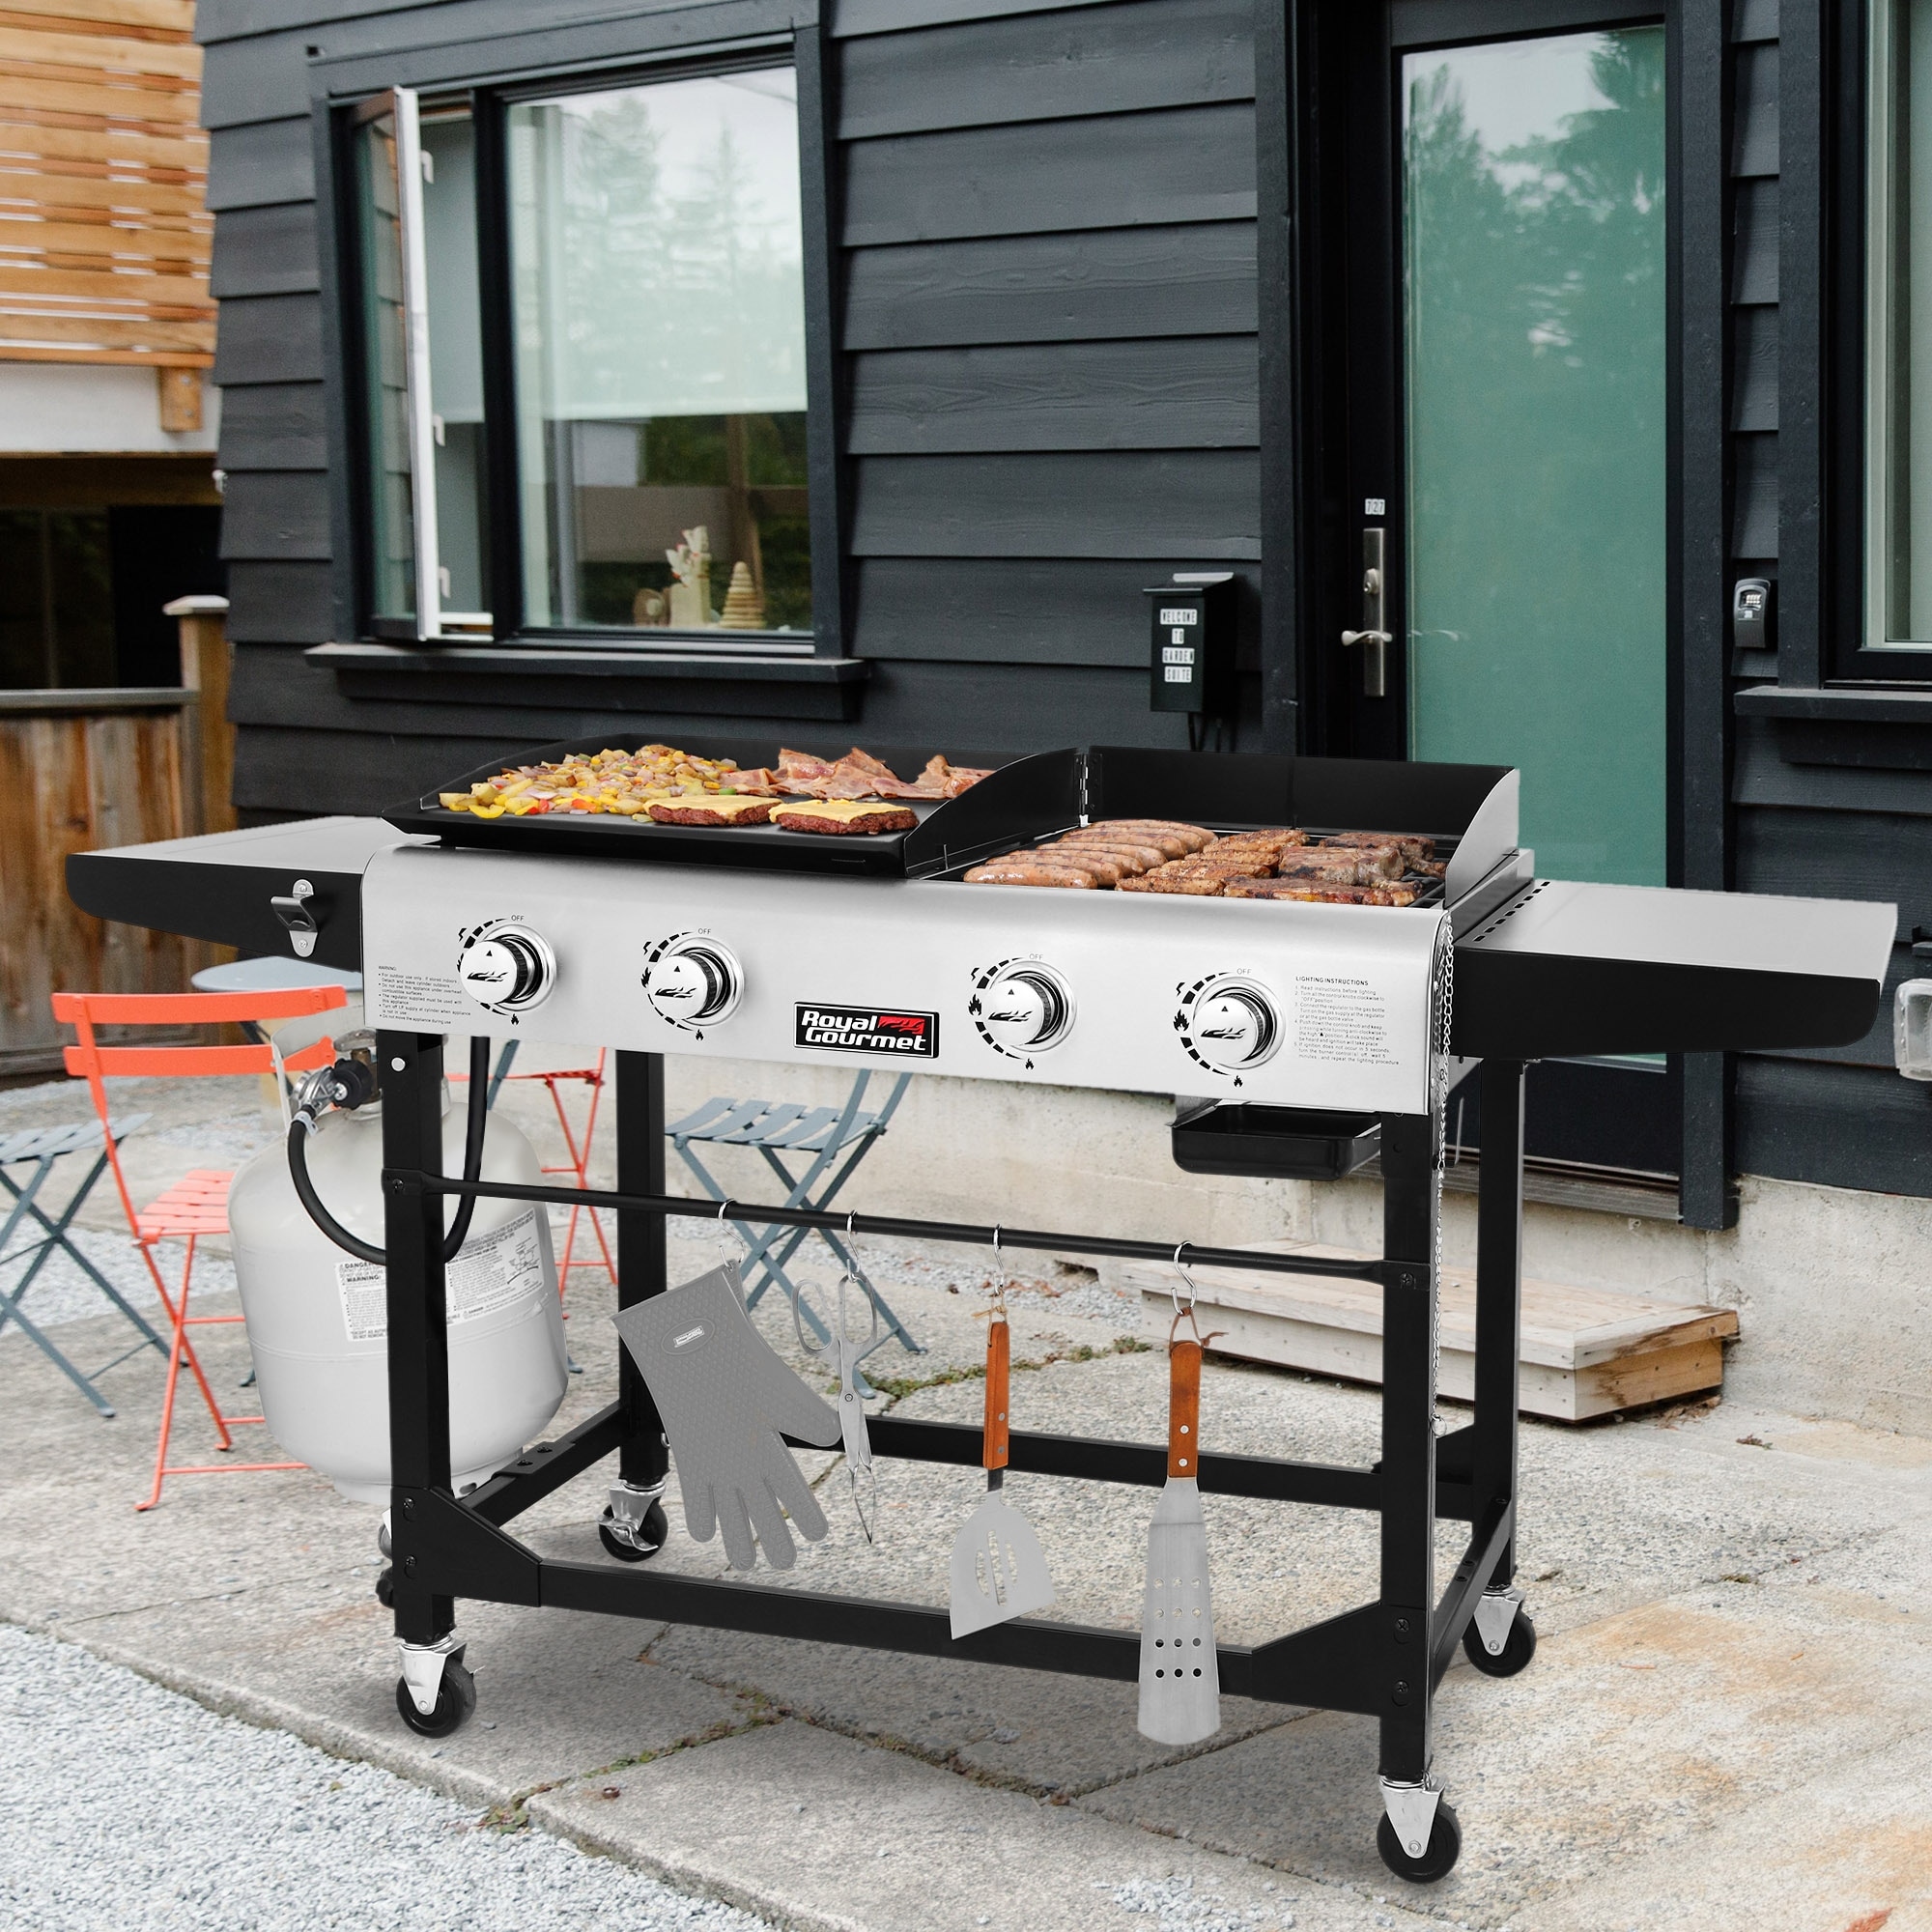 https://ak1.ostkcdn.com/images/products/is/images/direct/dbee5ffdc4a2e4c950e0441e029c3f356ba0a3c5/Royal-Gourmet-4-Burner-Portable-Flat-Top-Gas-Grill-and-Griddle-Combo-with-Folding-Legs%2C-Black-%26-Silver.jpg